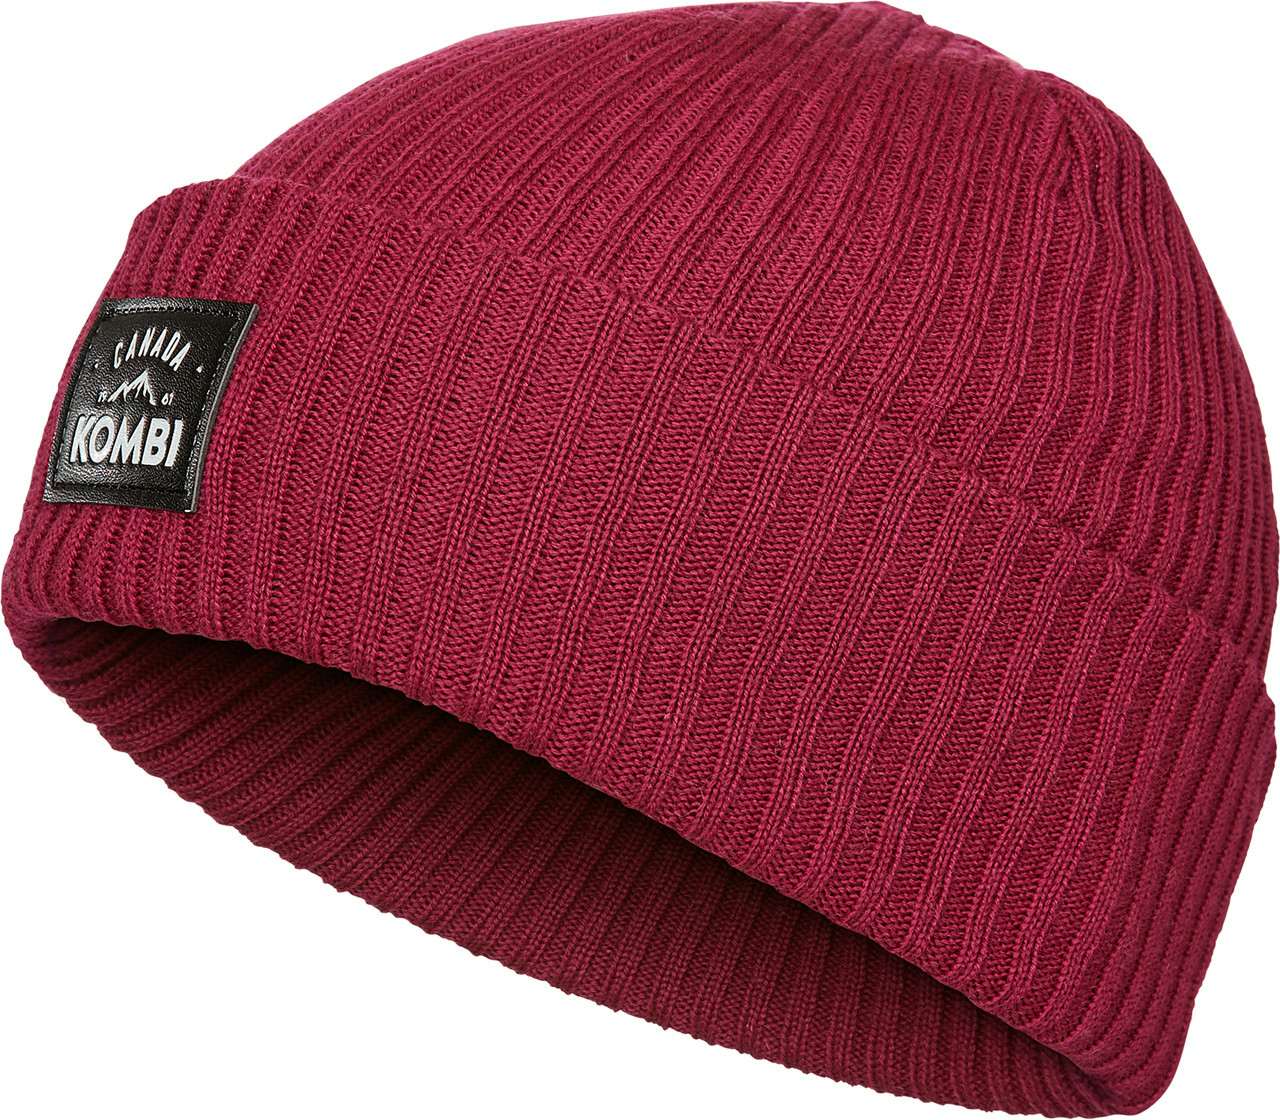 Tuque The Street Betterave